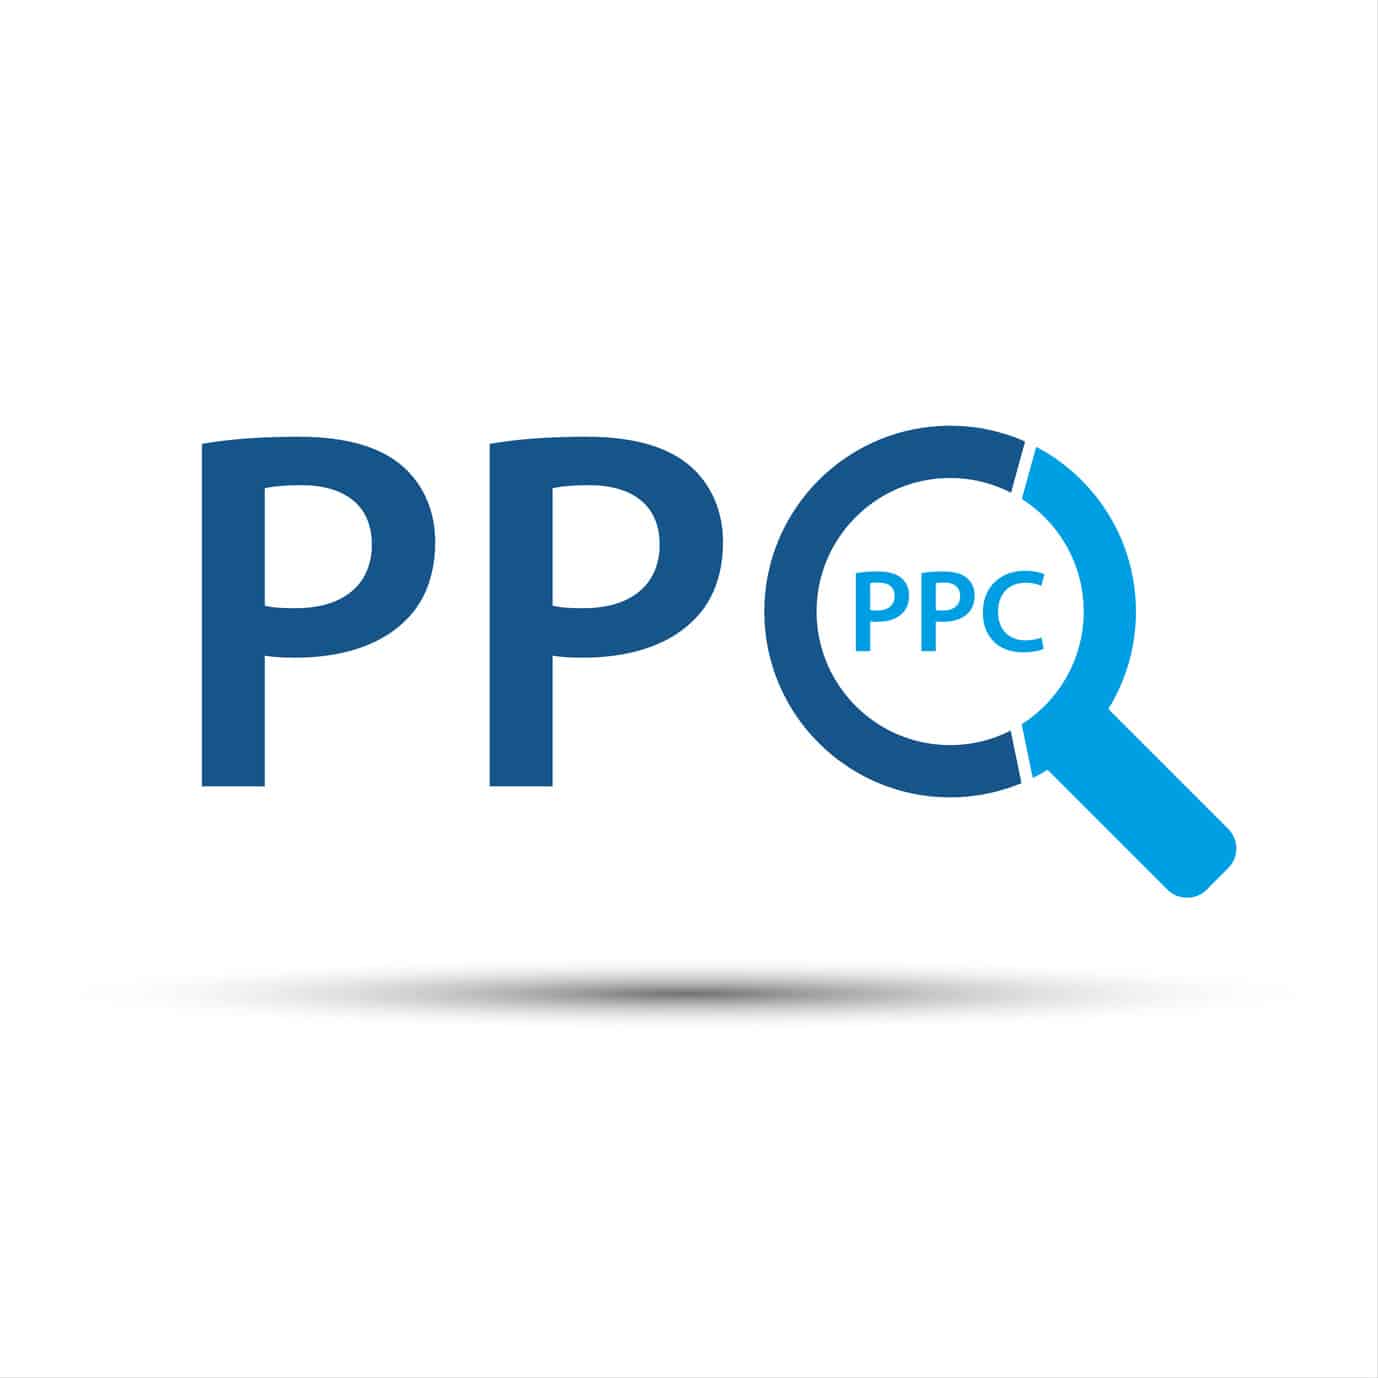 7 Mistakes with PPC Strategies